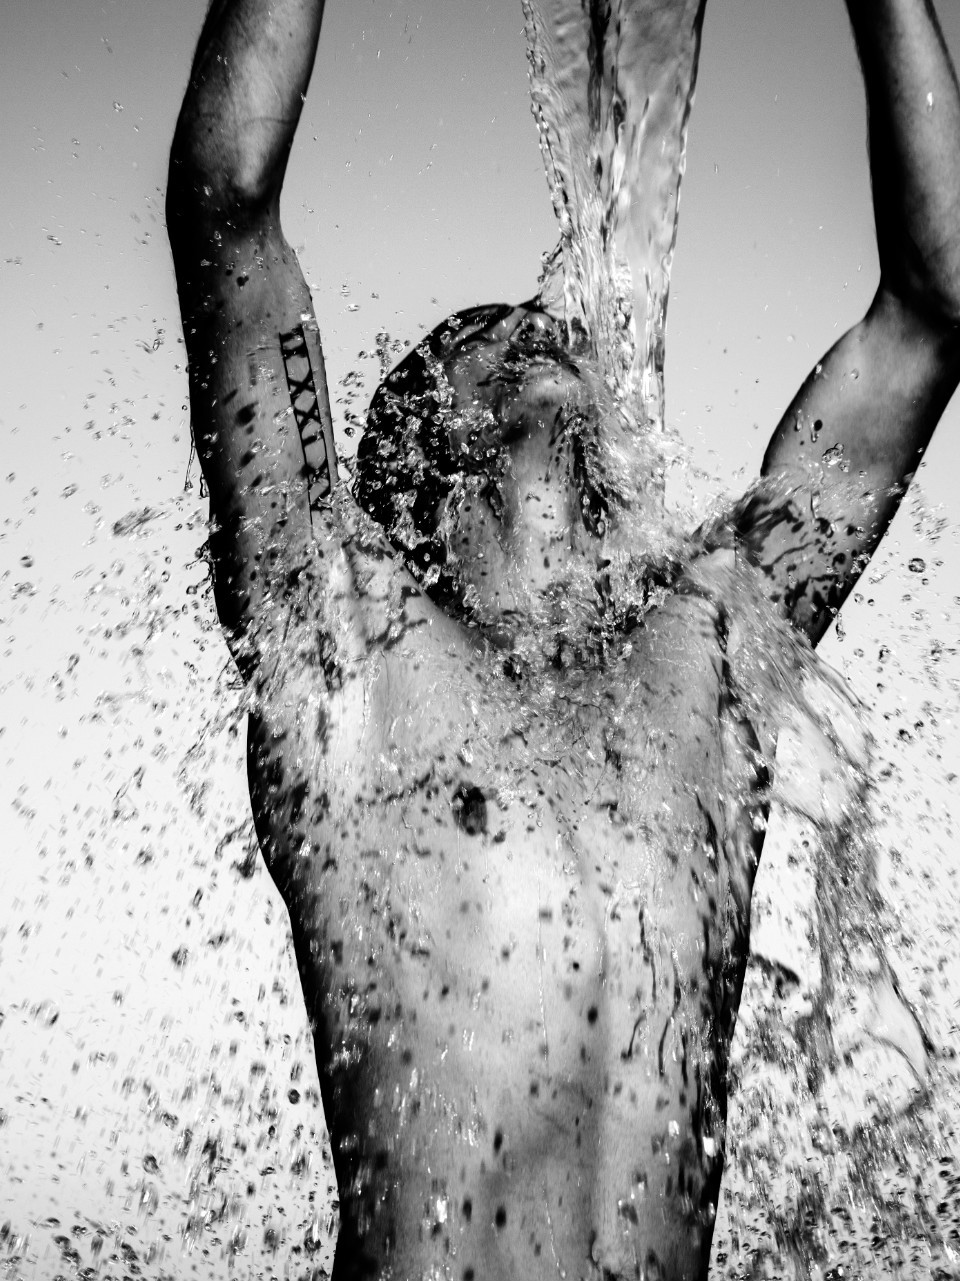 Taking Off:
The Shower (?) Series, #514.
Click, reblog and follow. Pass me around to all your friends.